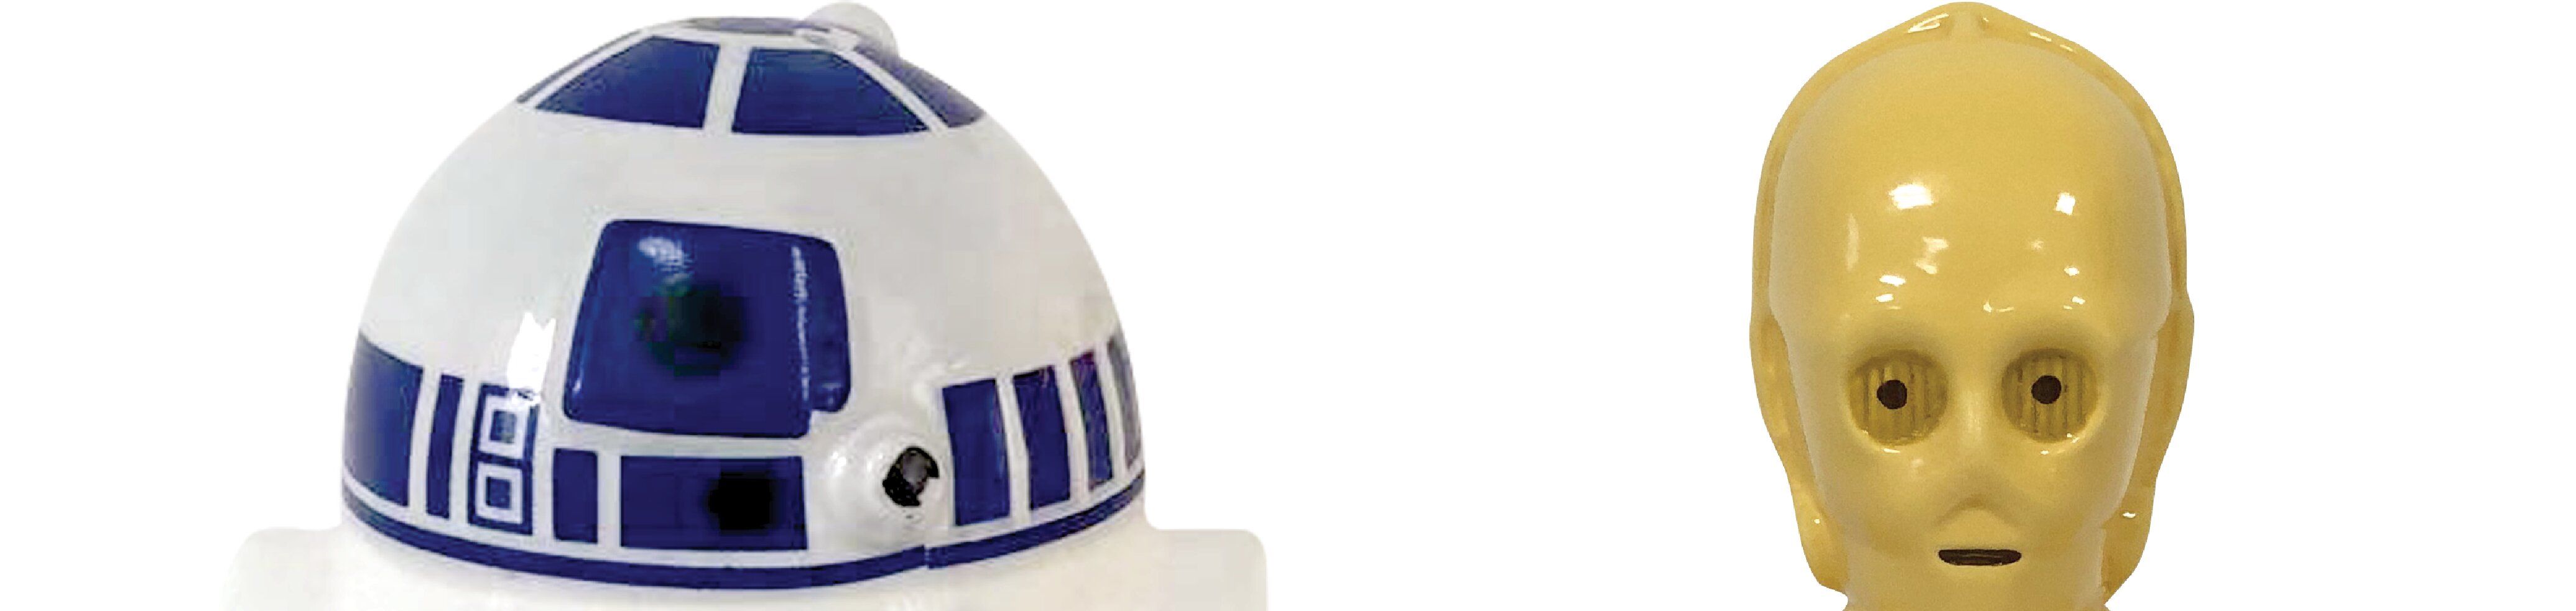 Star Wars R2-D2 and C-3PO Salt Pepper Shakers 